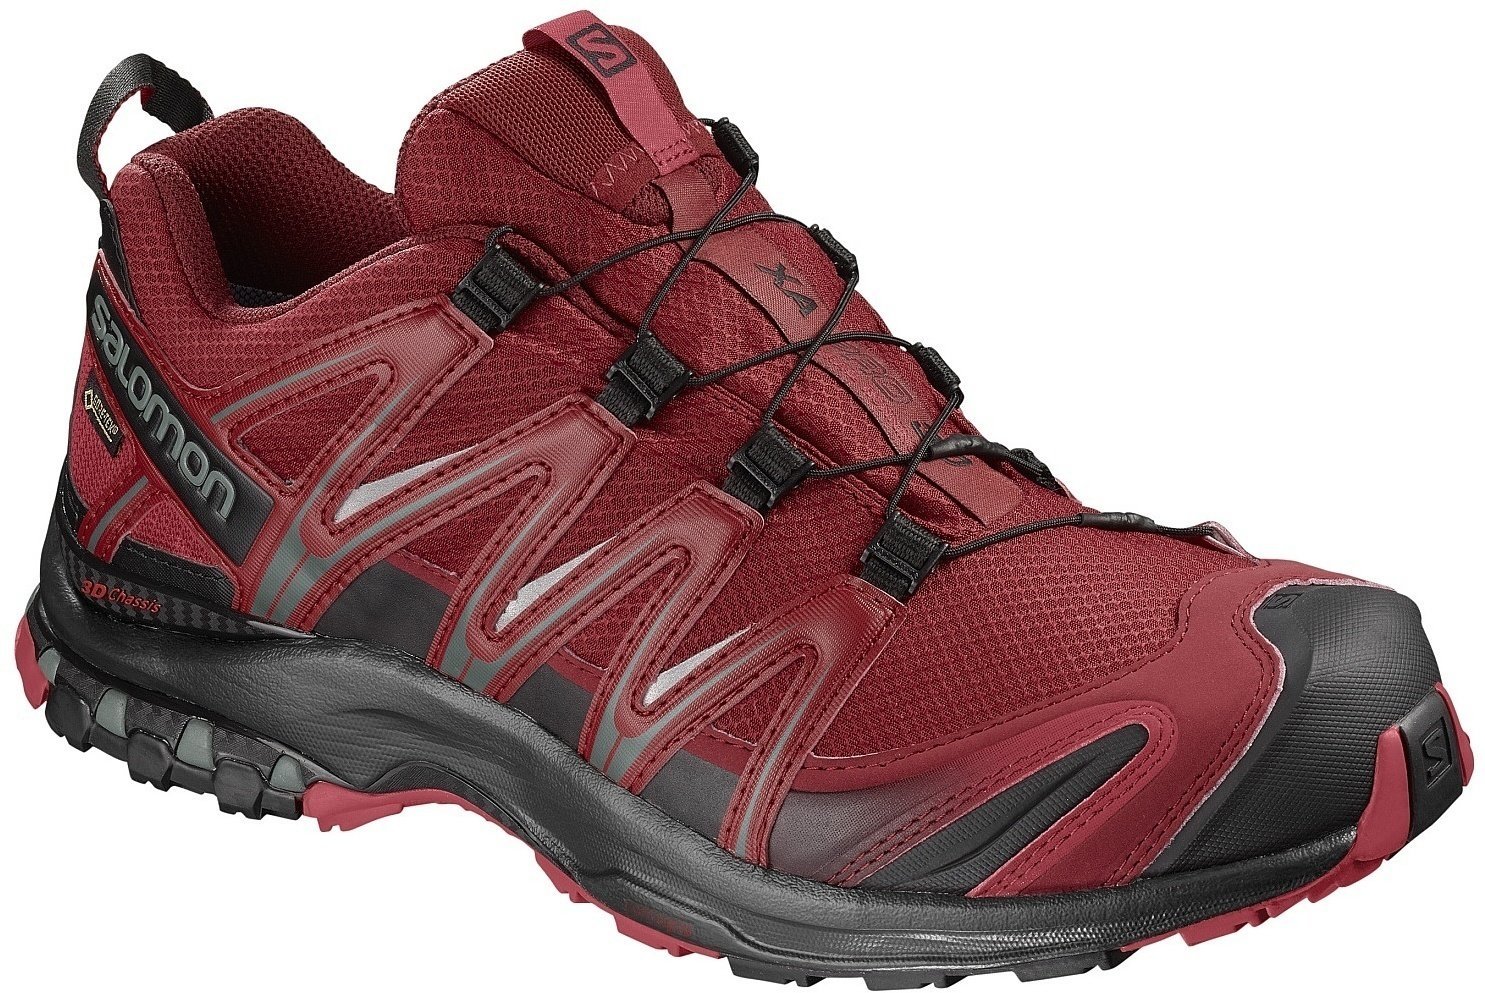 Chaussures outdoor hommes Salomon XA Pro 3D GTX Red Dahlia/Black/Barbados Cherry 45 1/3 Chaussures outdoor hommes